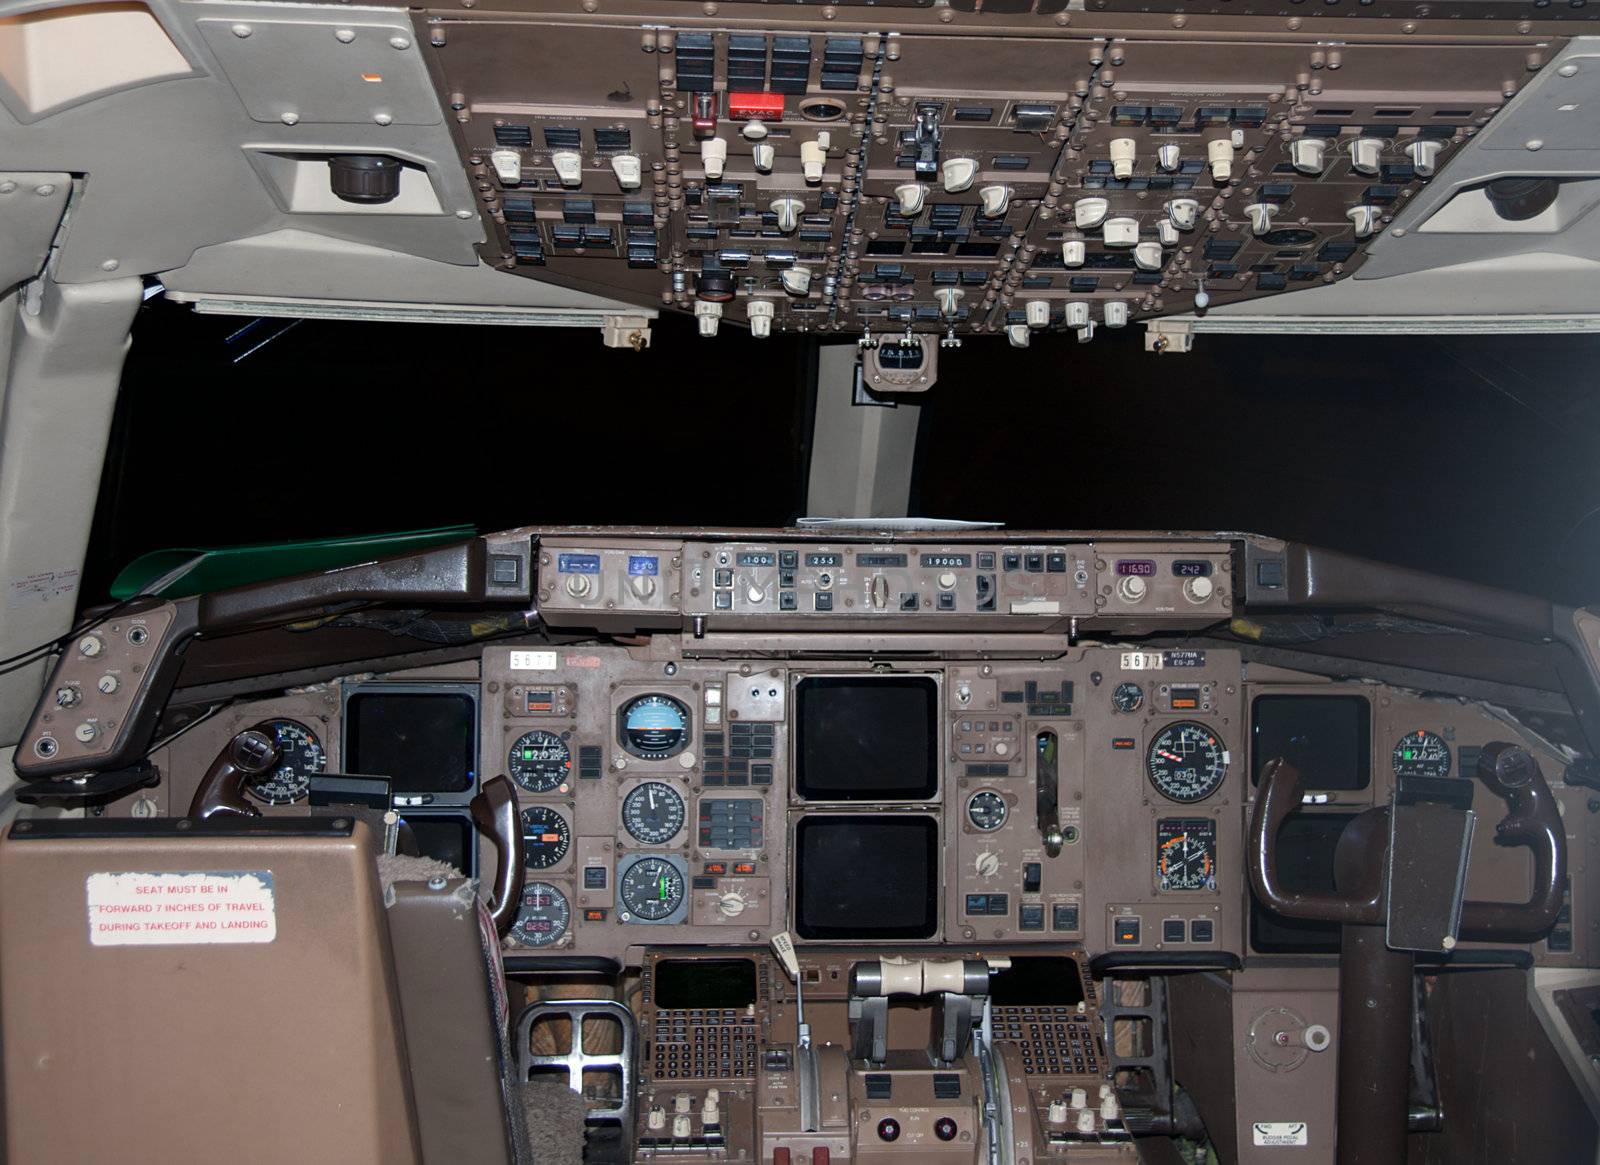 cockpit of a commercial passenger airliner without pilots